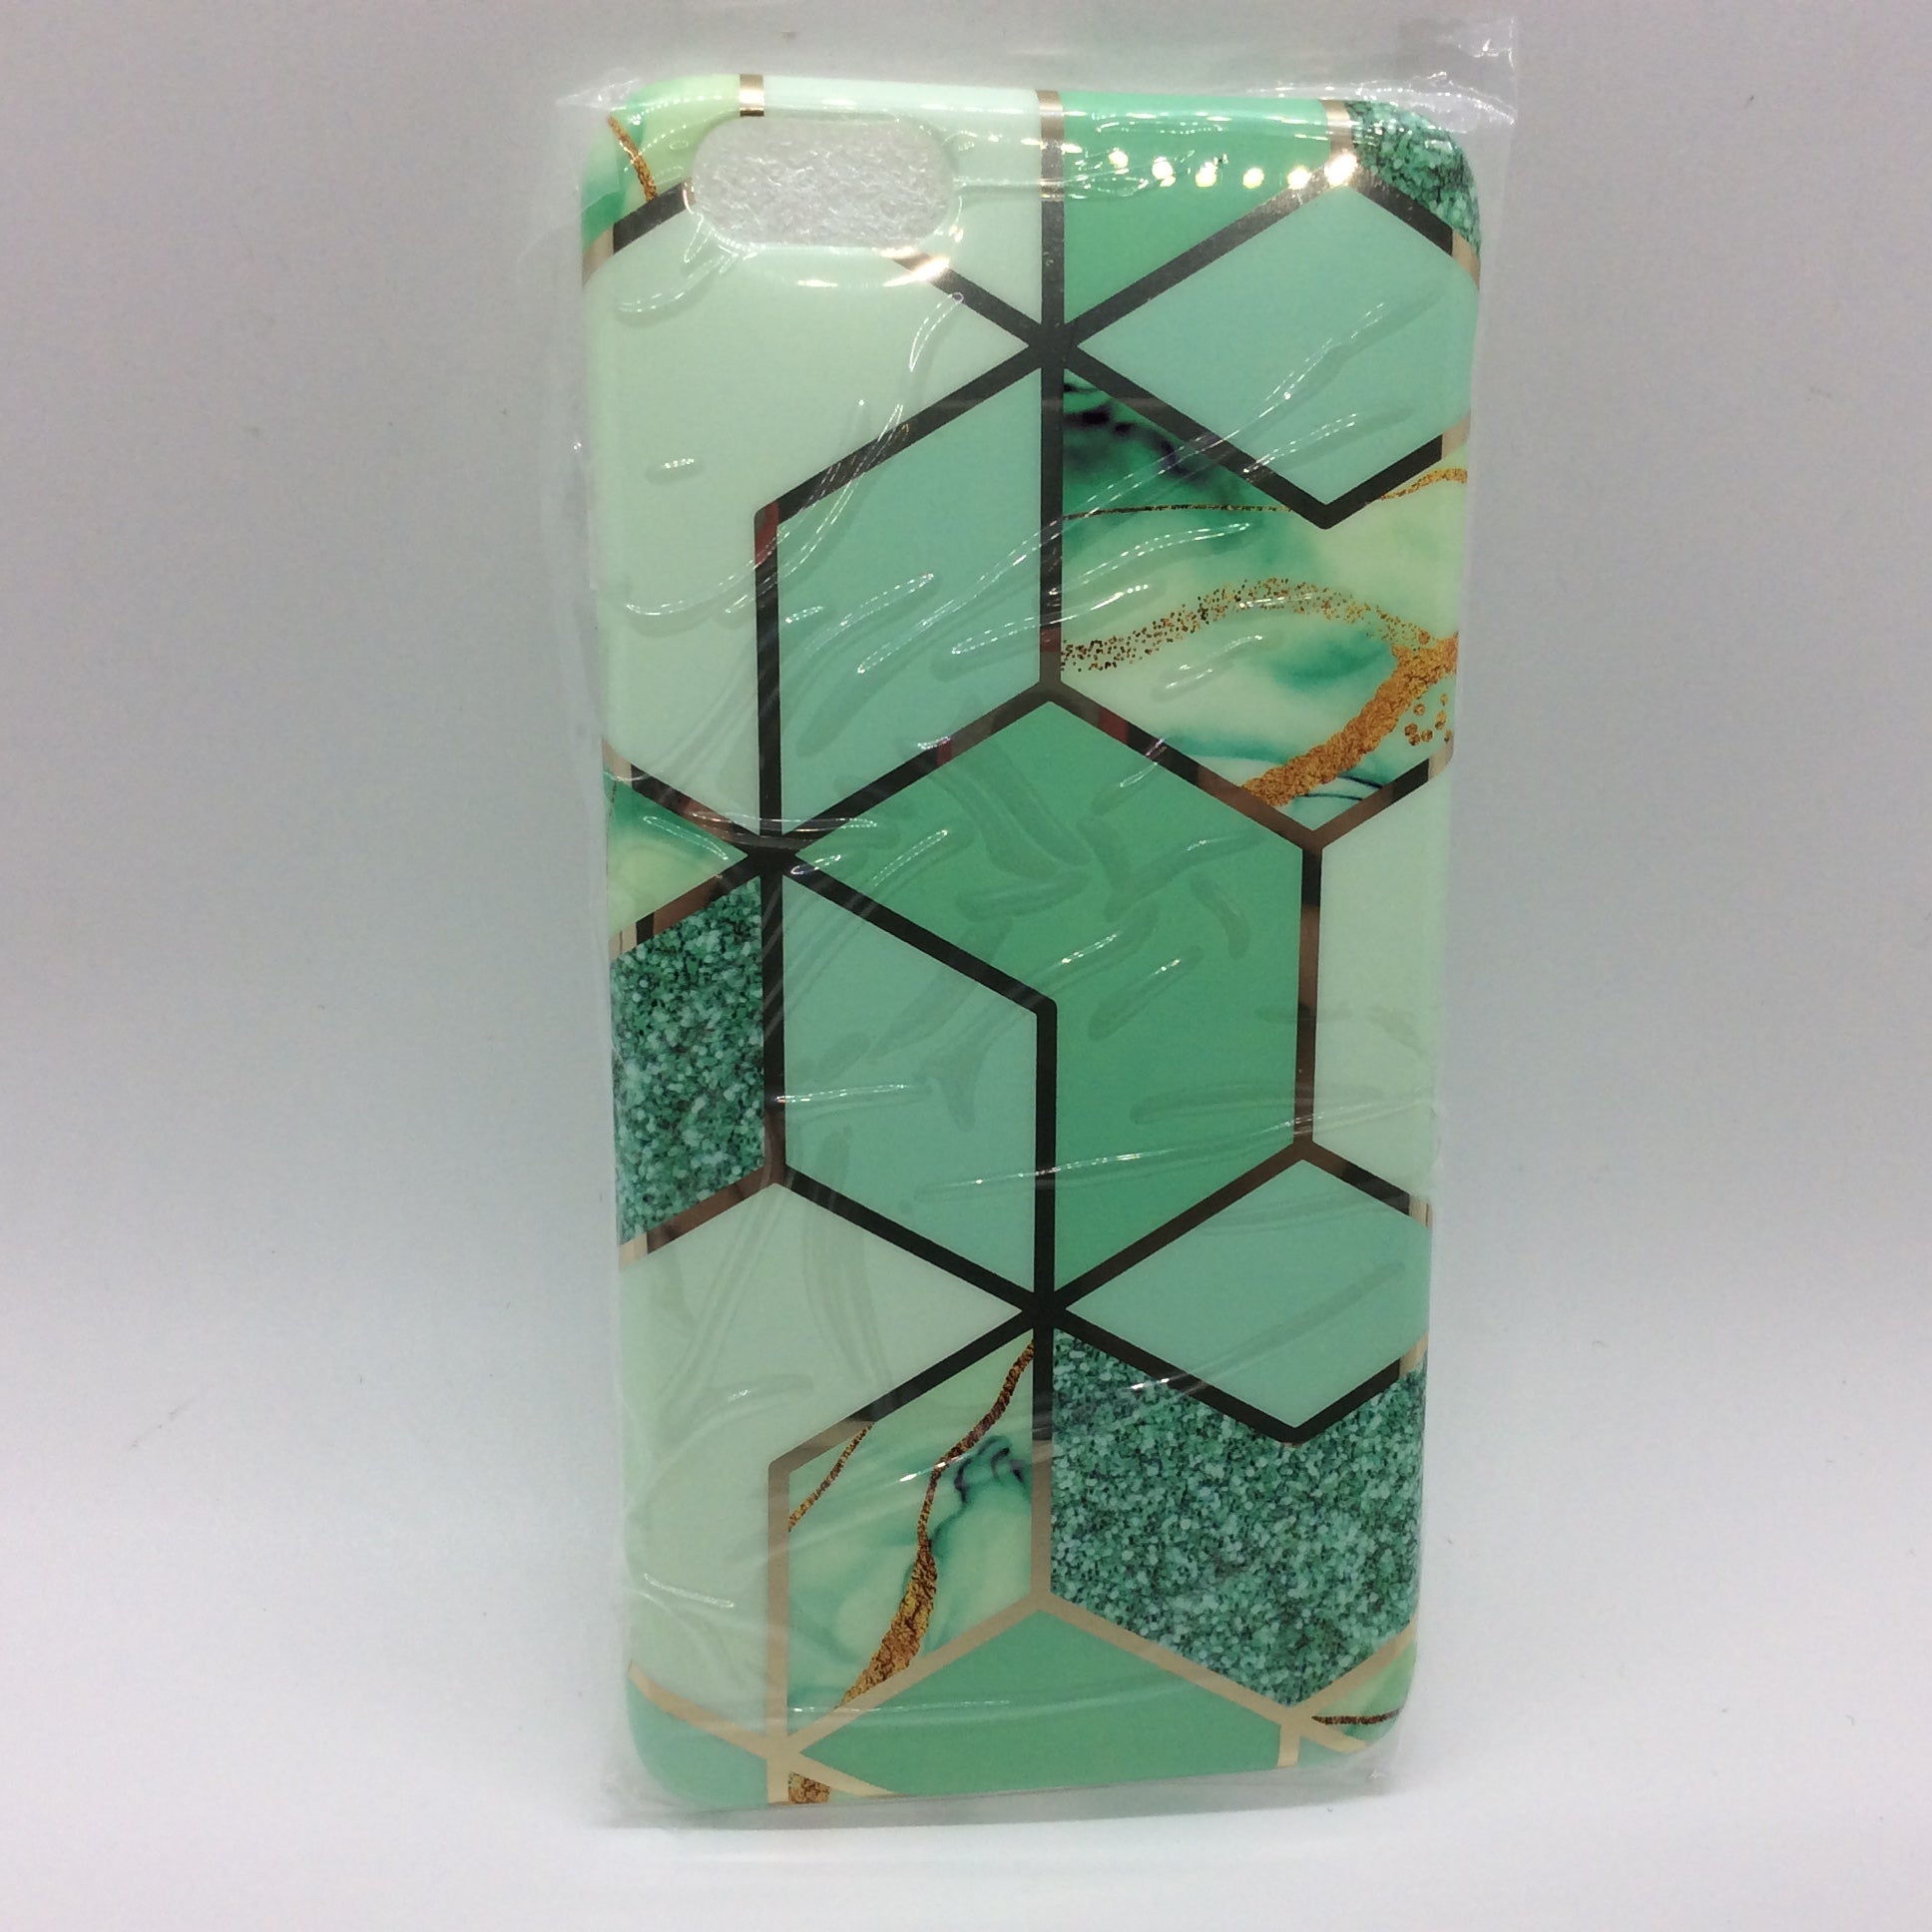 a glass vase with a green and black design on it